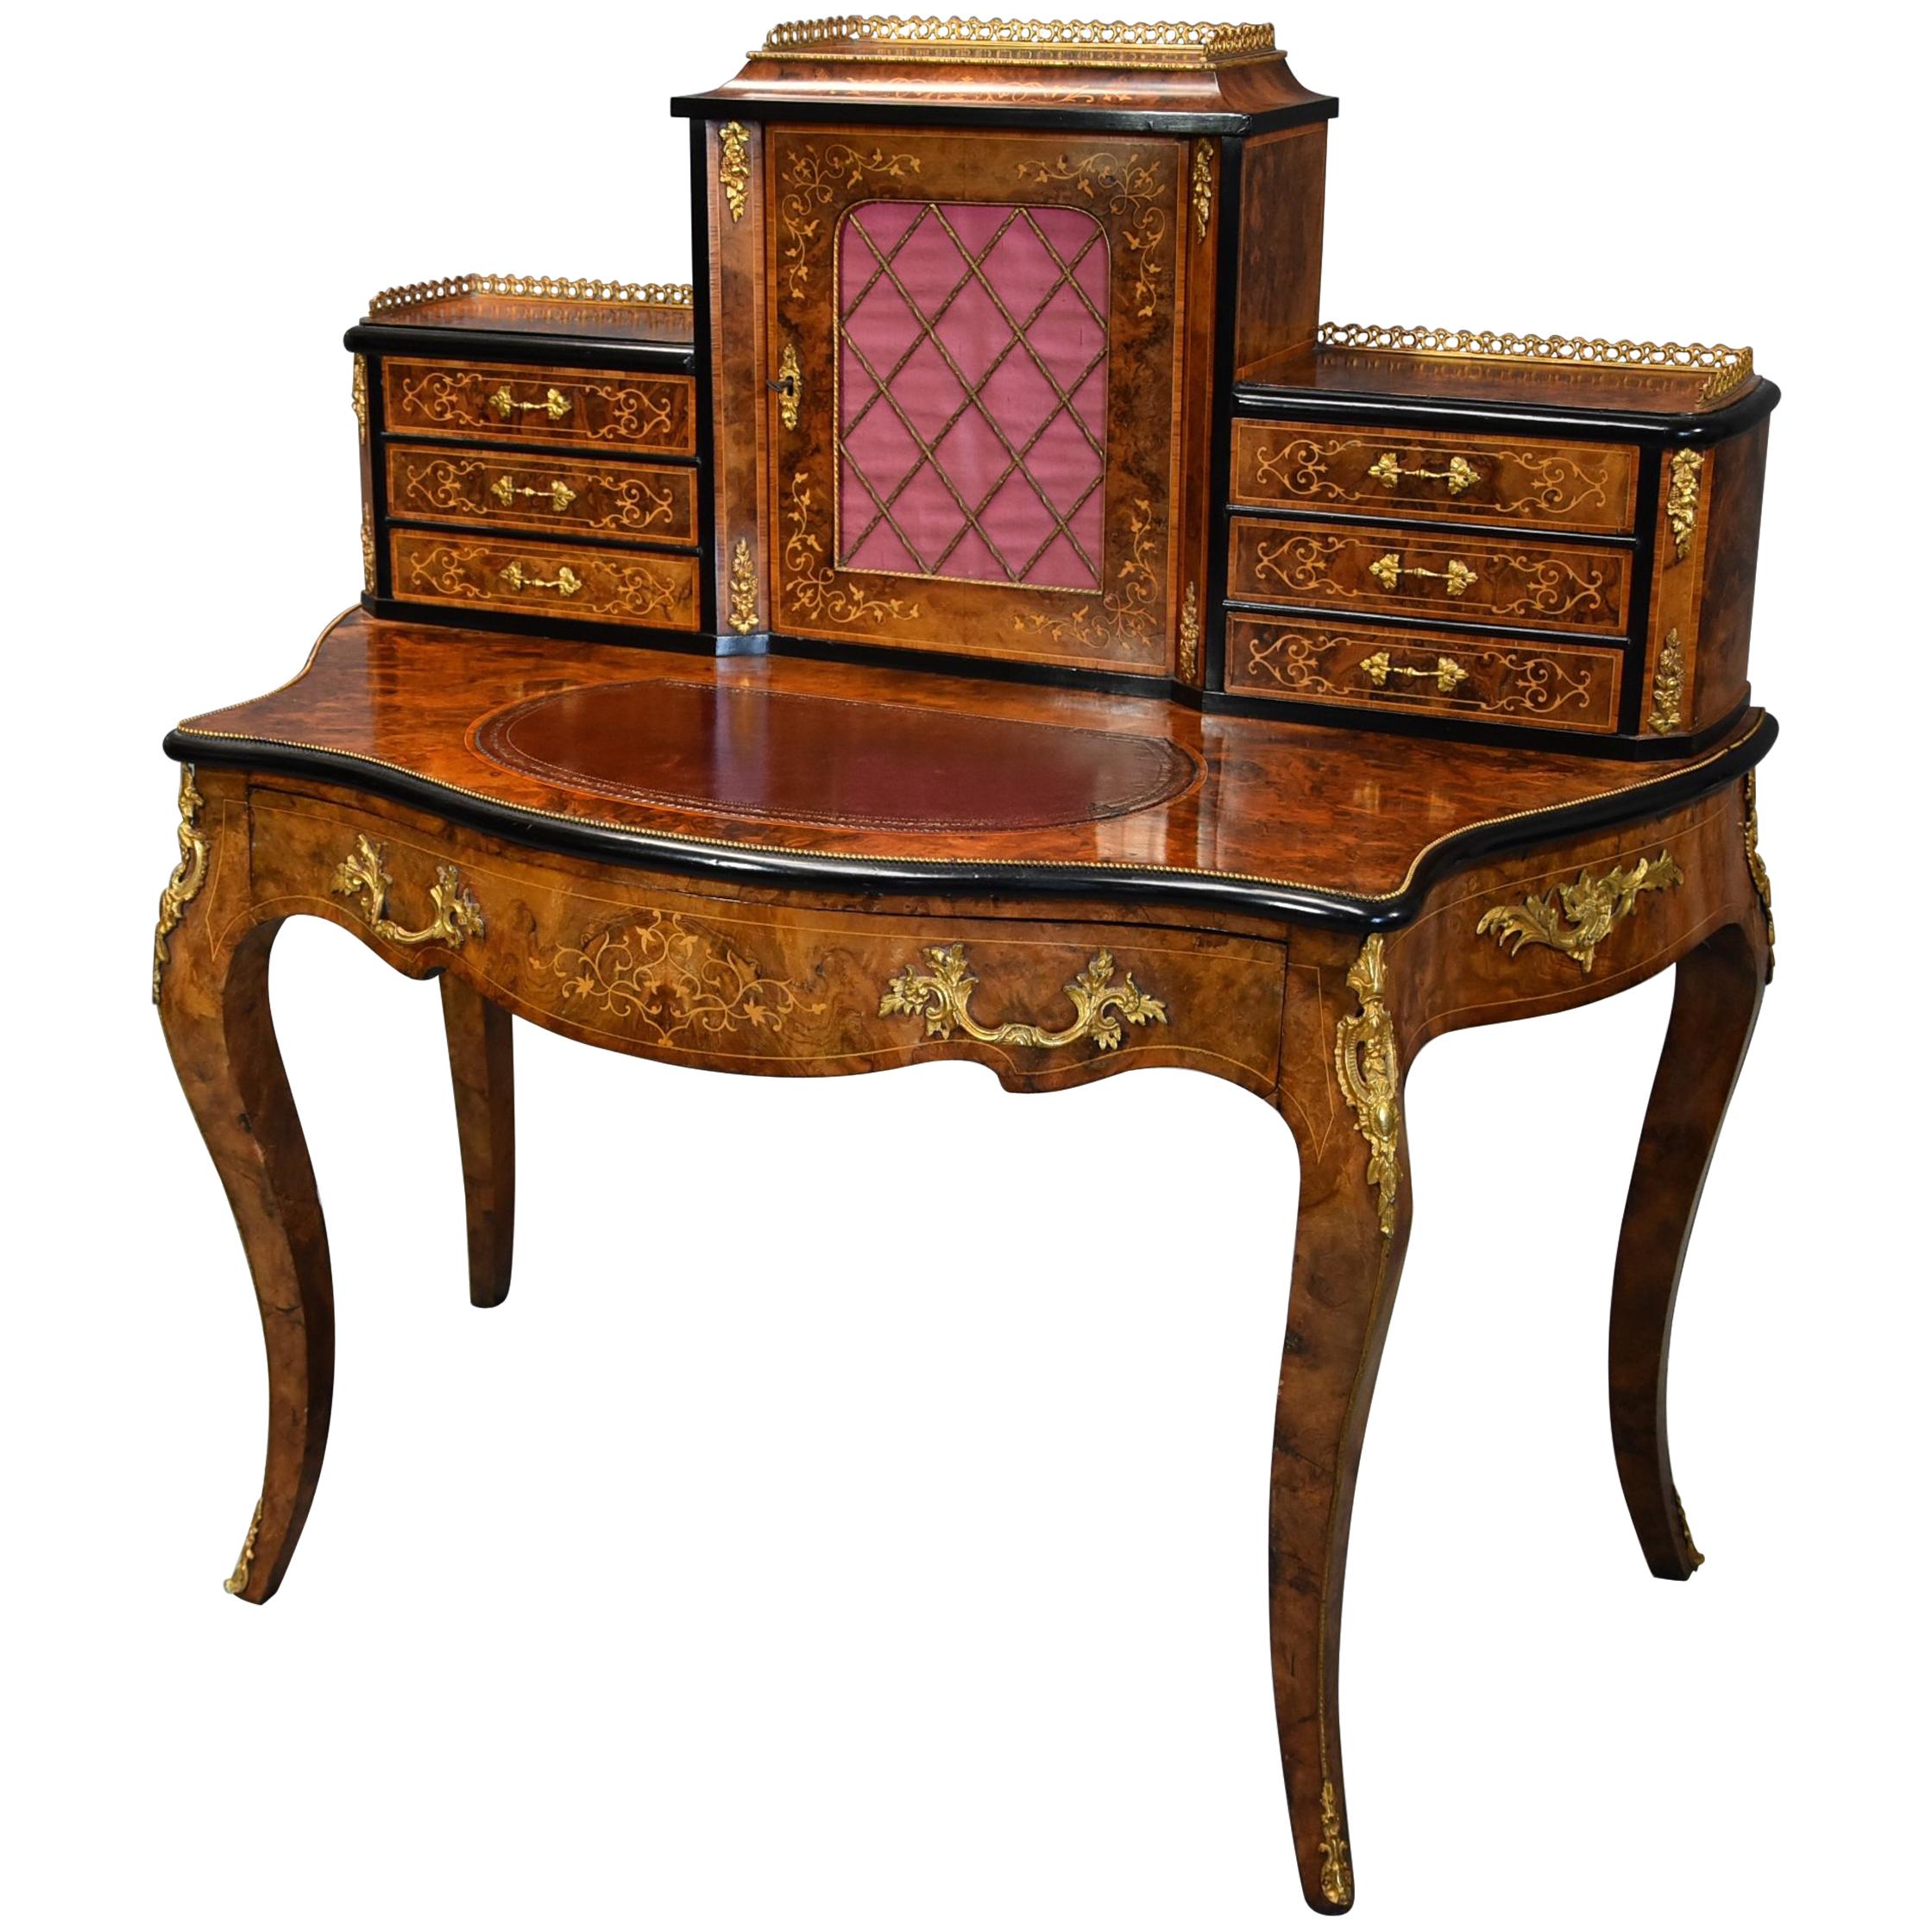 Mid-19th Century Fine Quality Burr Walnut Bonheur de Jour in the French Style For Sale